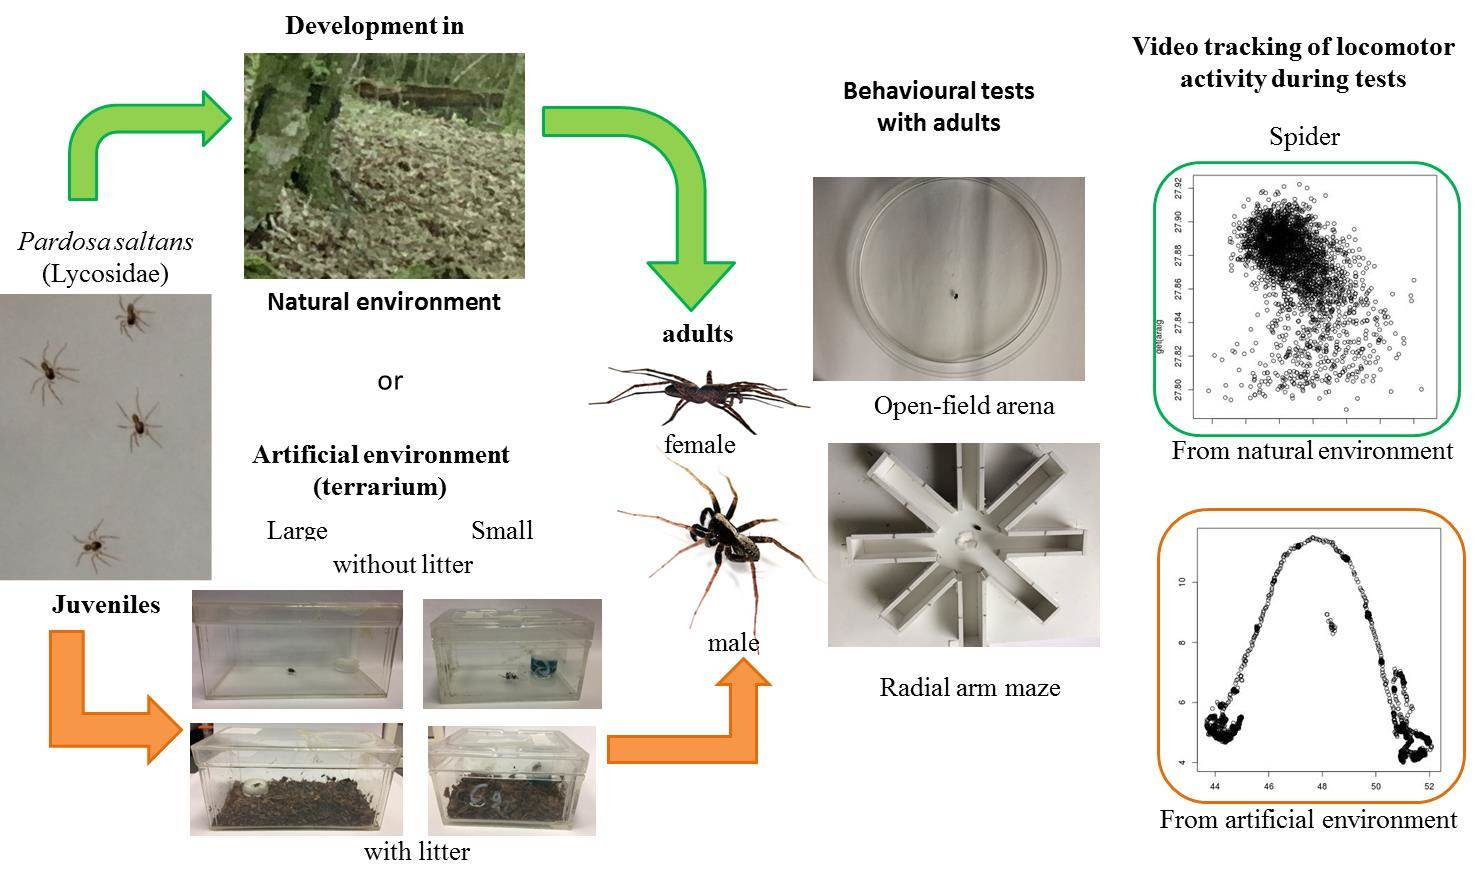 jumping spider life cycle